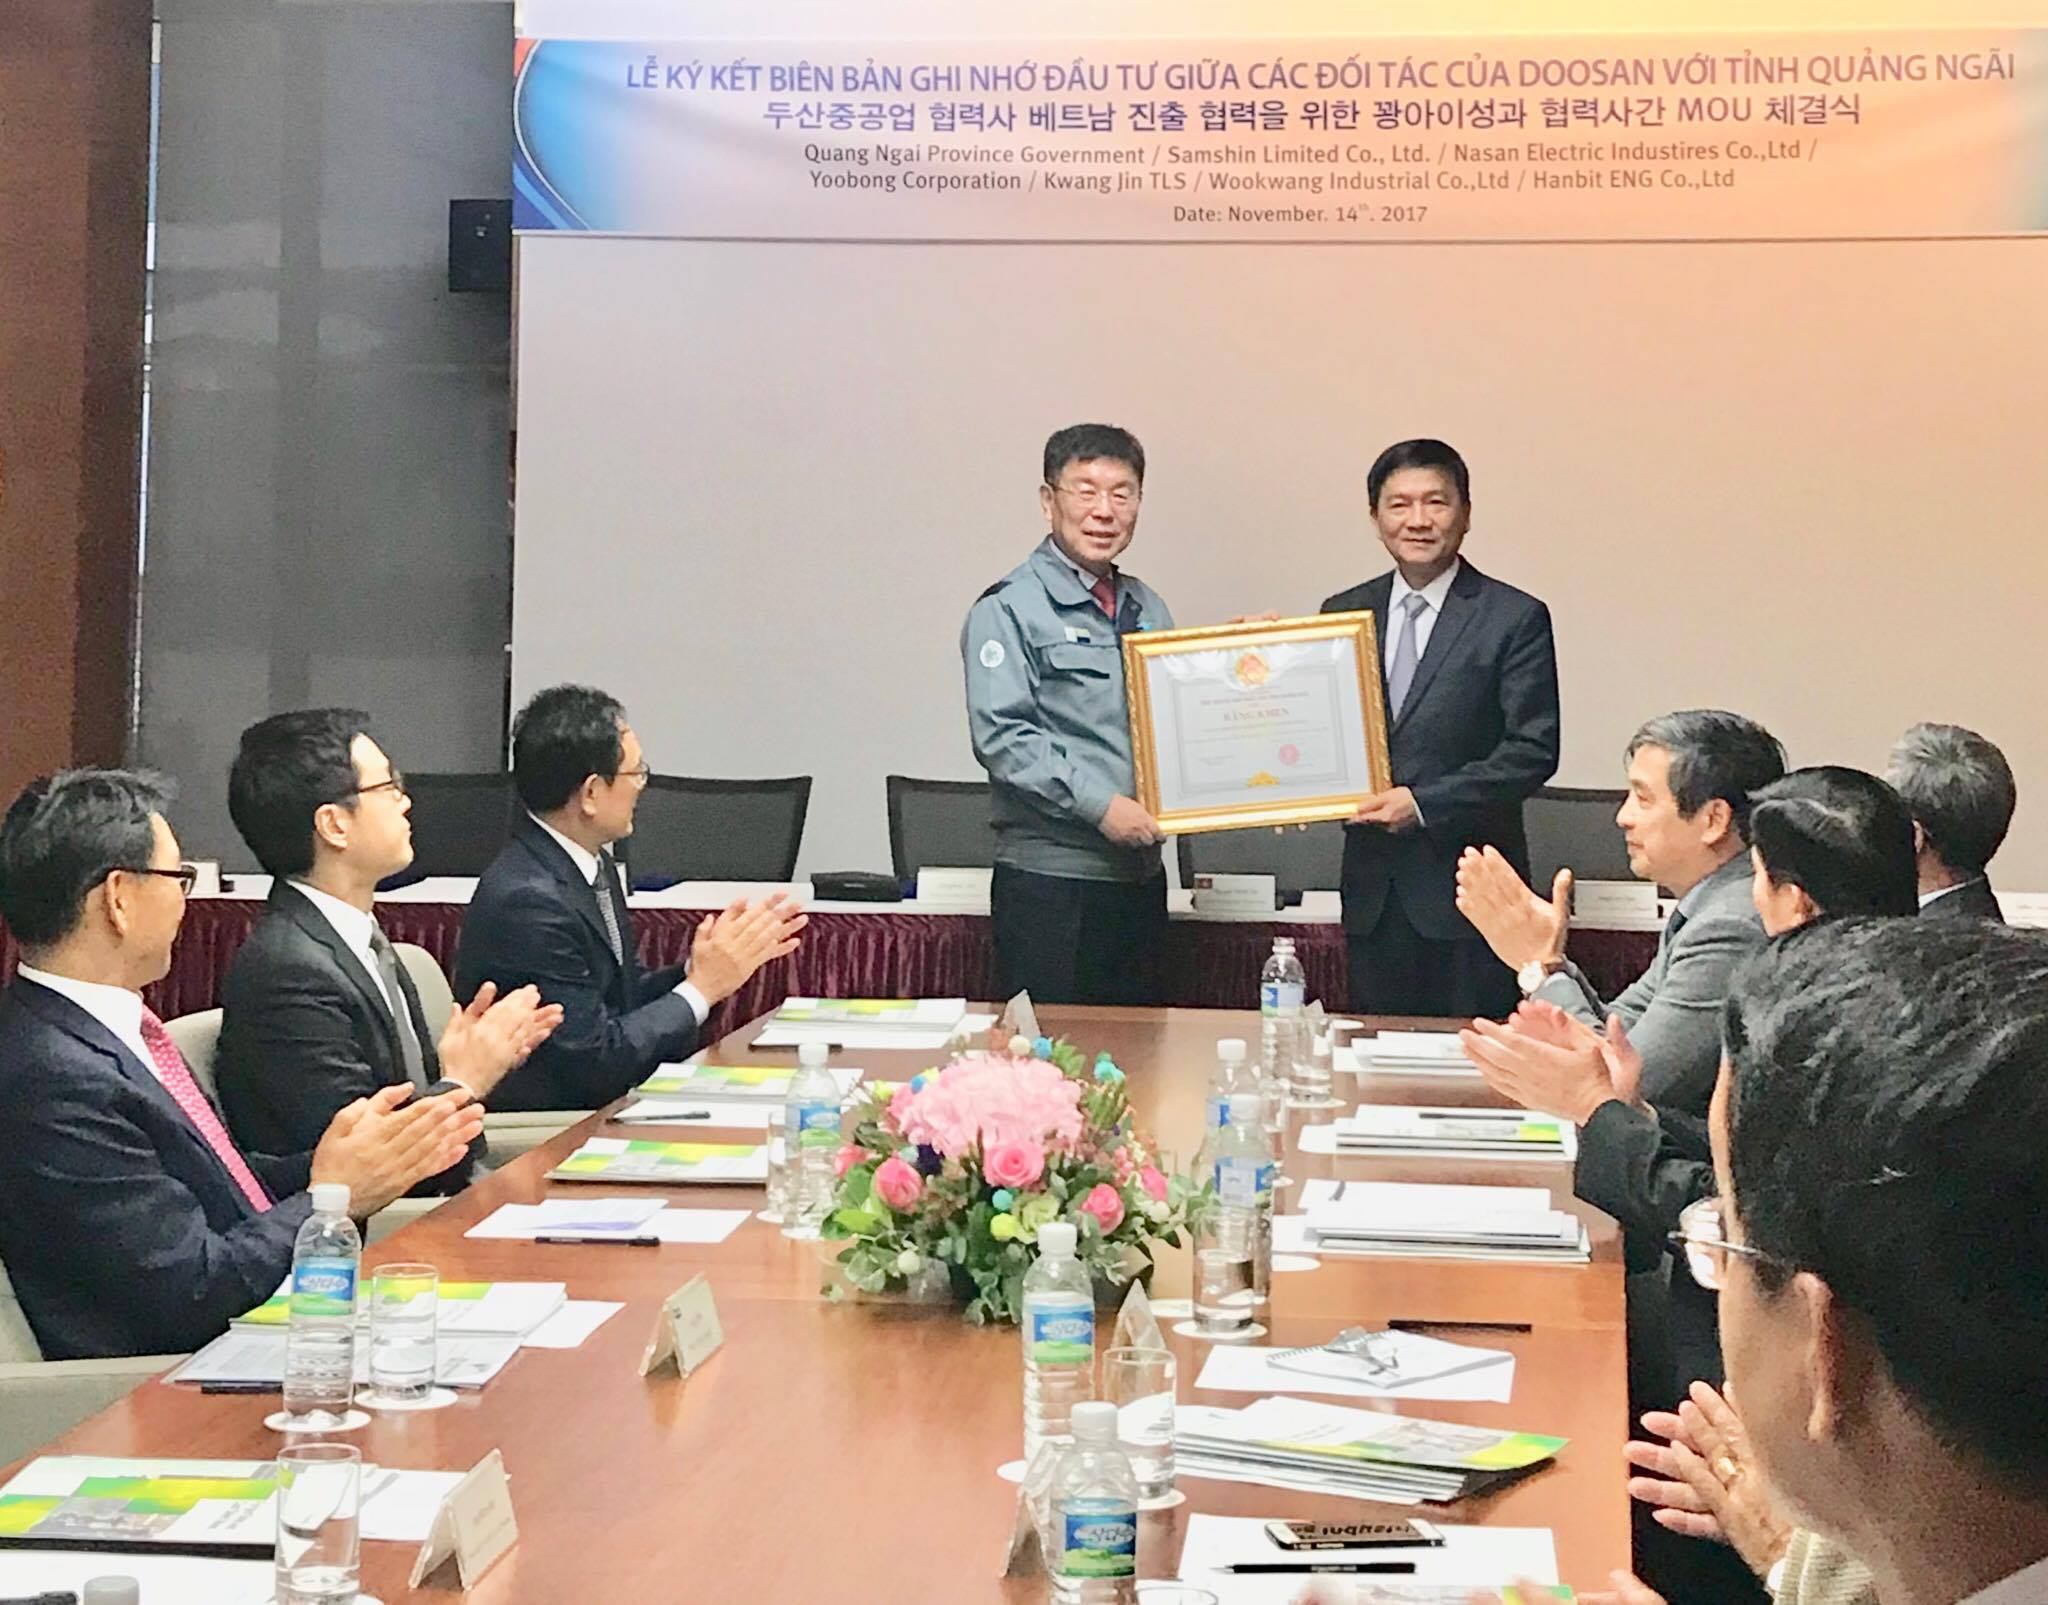 Quang Ngai chairman Tran Ngoc Cang (right) hands over a certificate of merit to Doosan Heavy Industries Vietnam in Quang Ngai, central Vietnam.